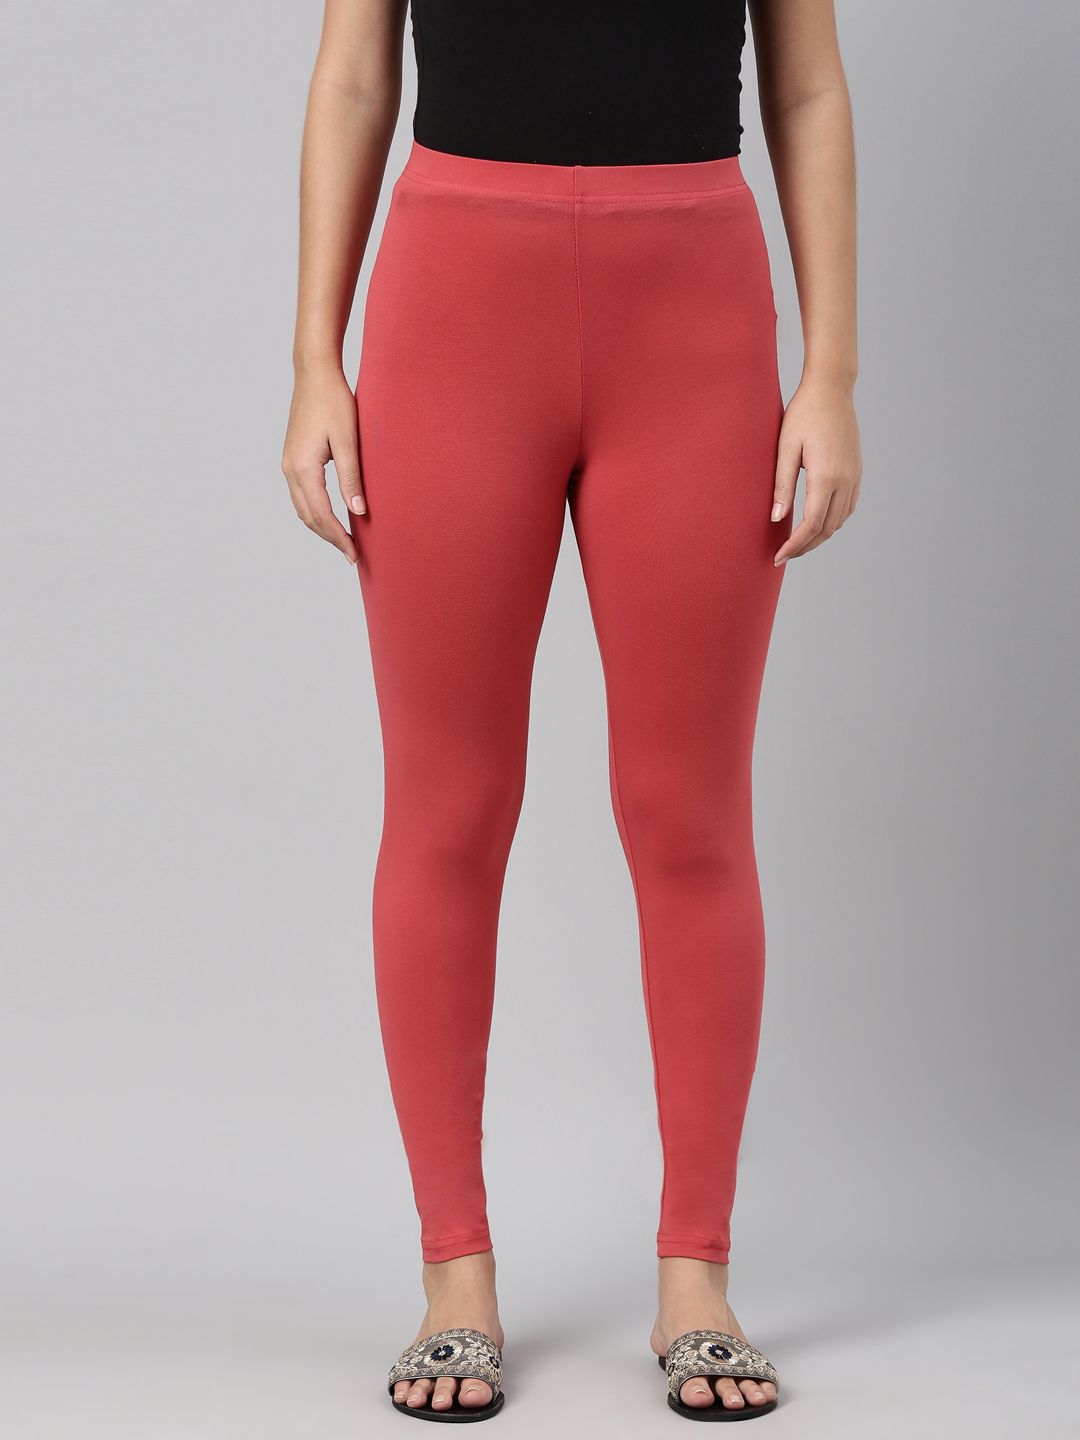 Go Colors Women Red Solid Ankle-Length Leggings Price in India